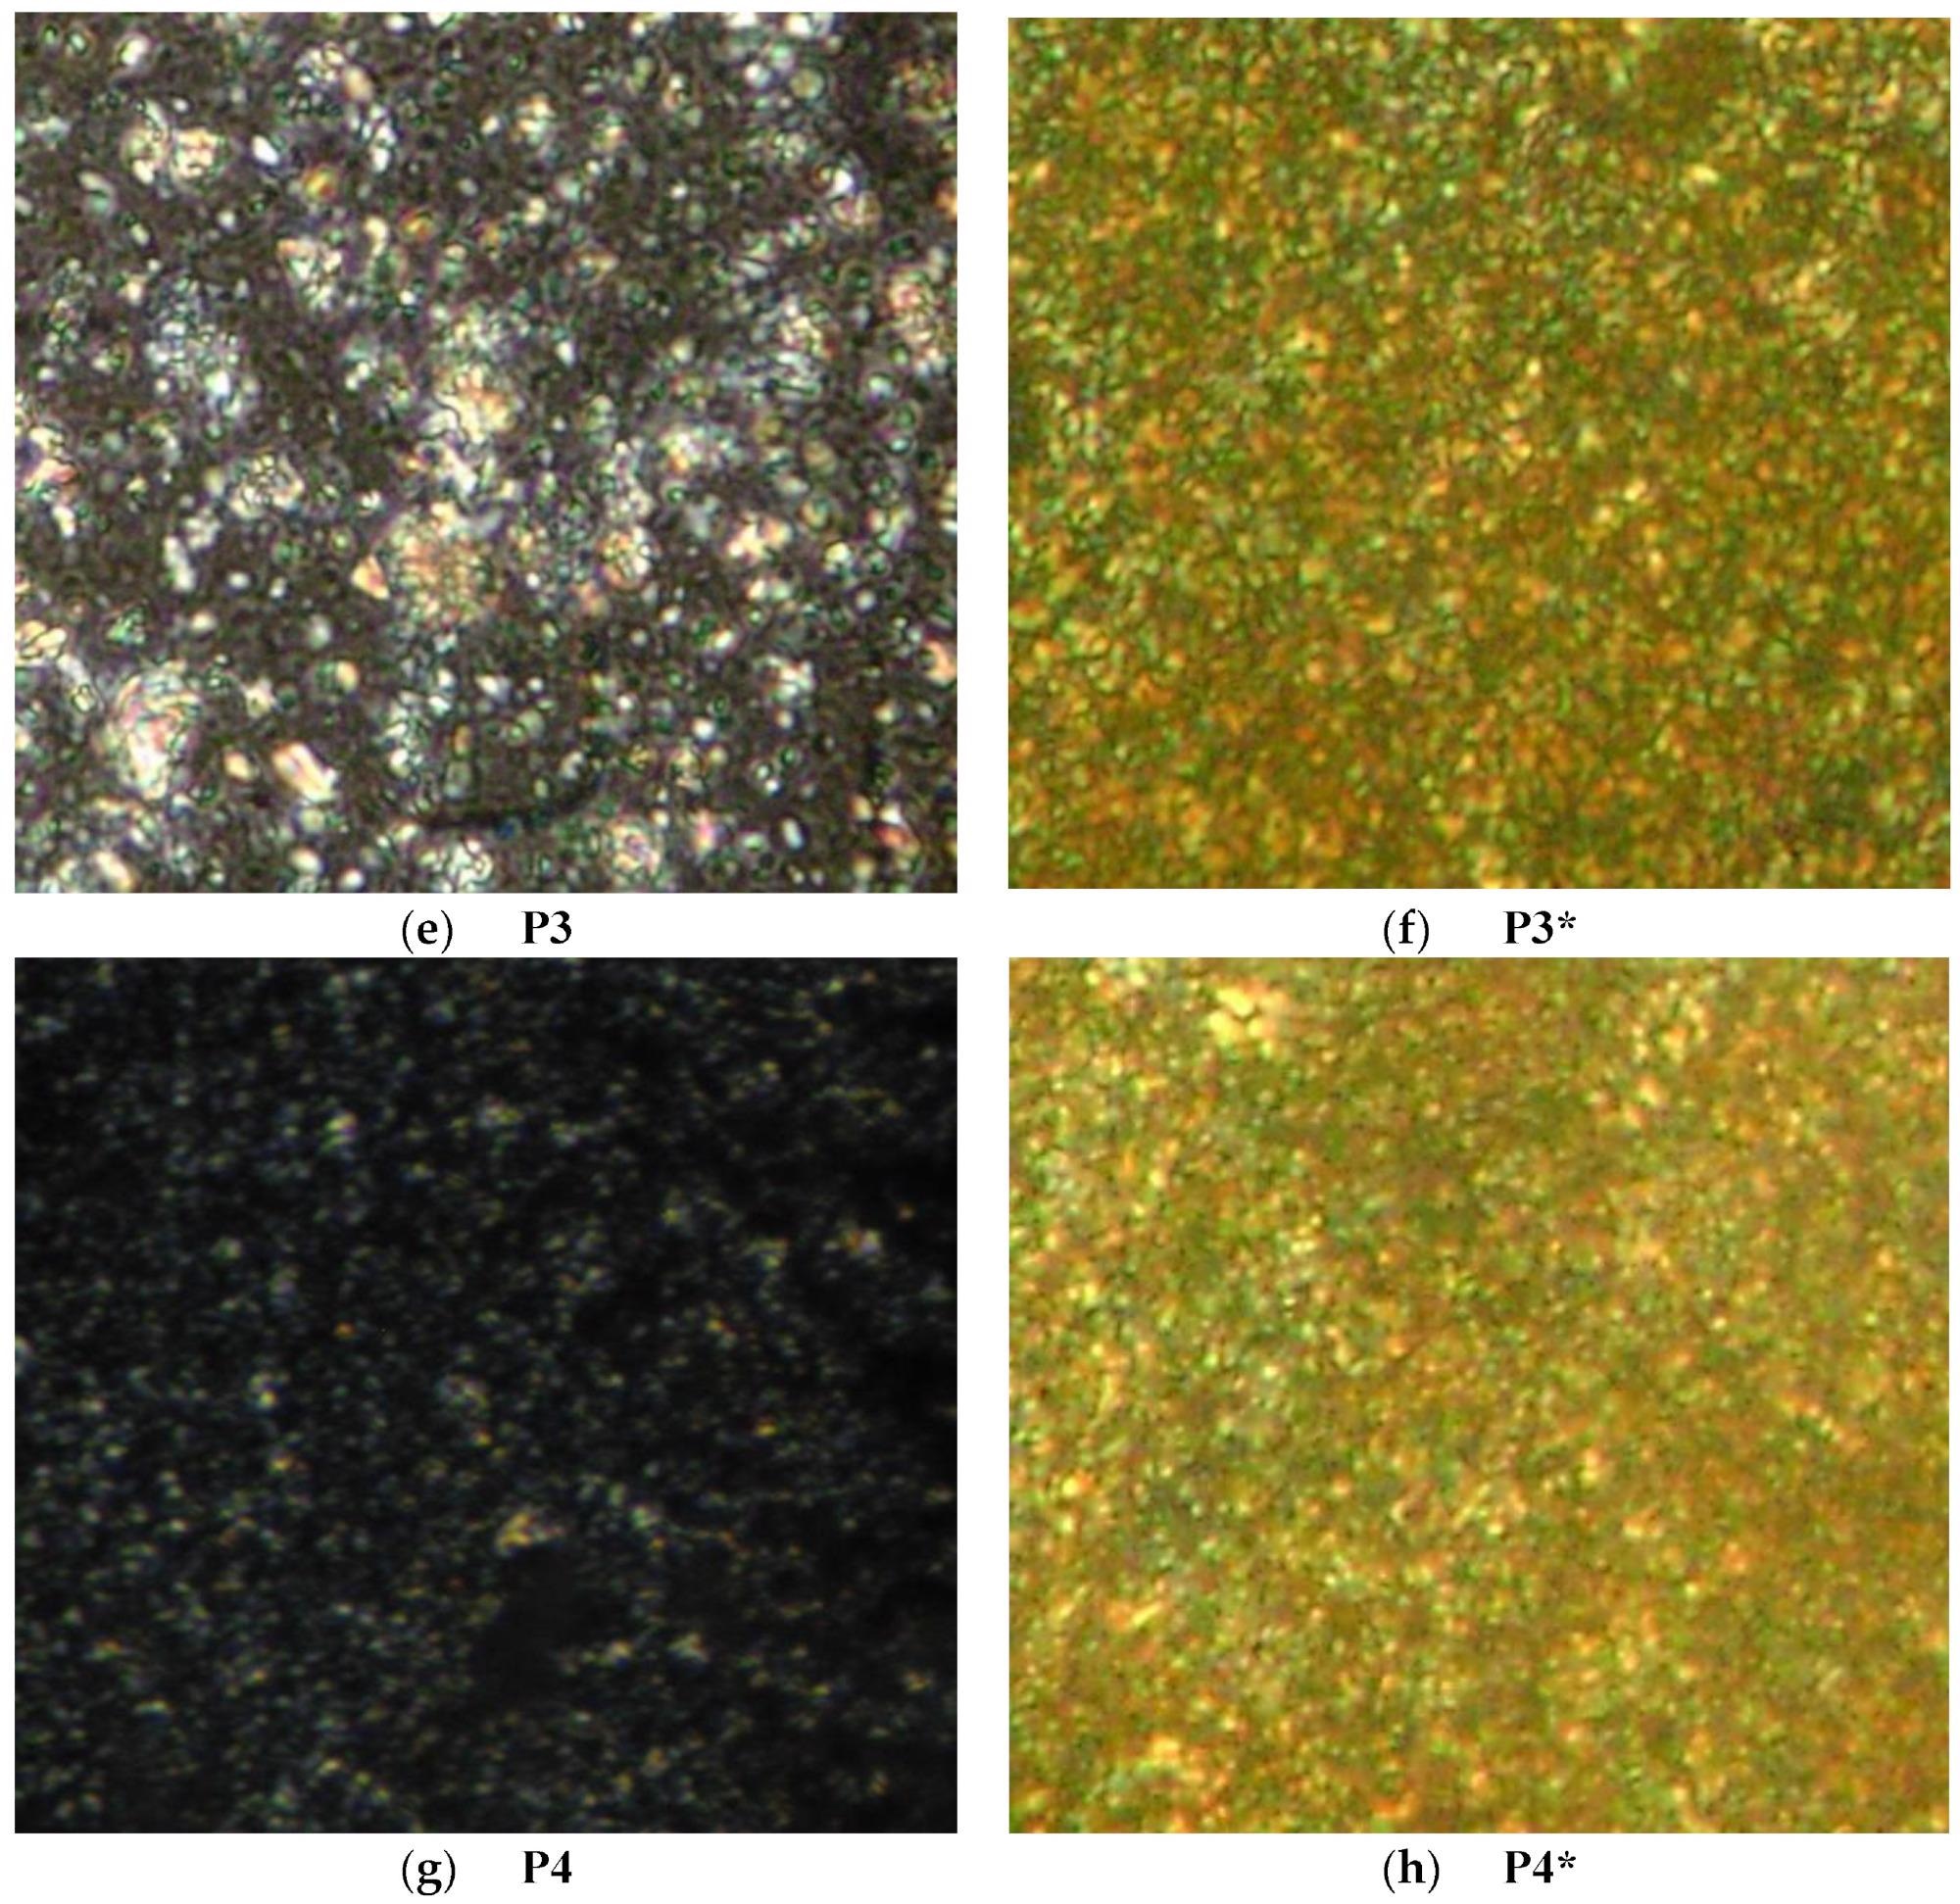 Representative POM images of the treated (a–d) and untreated (e–h) thin films. POM images were acquired using the 40× objective, and the eyepiece had 10× magnification, giving a theoretical magnification of 400×.